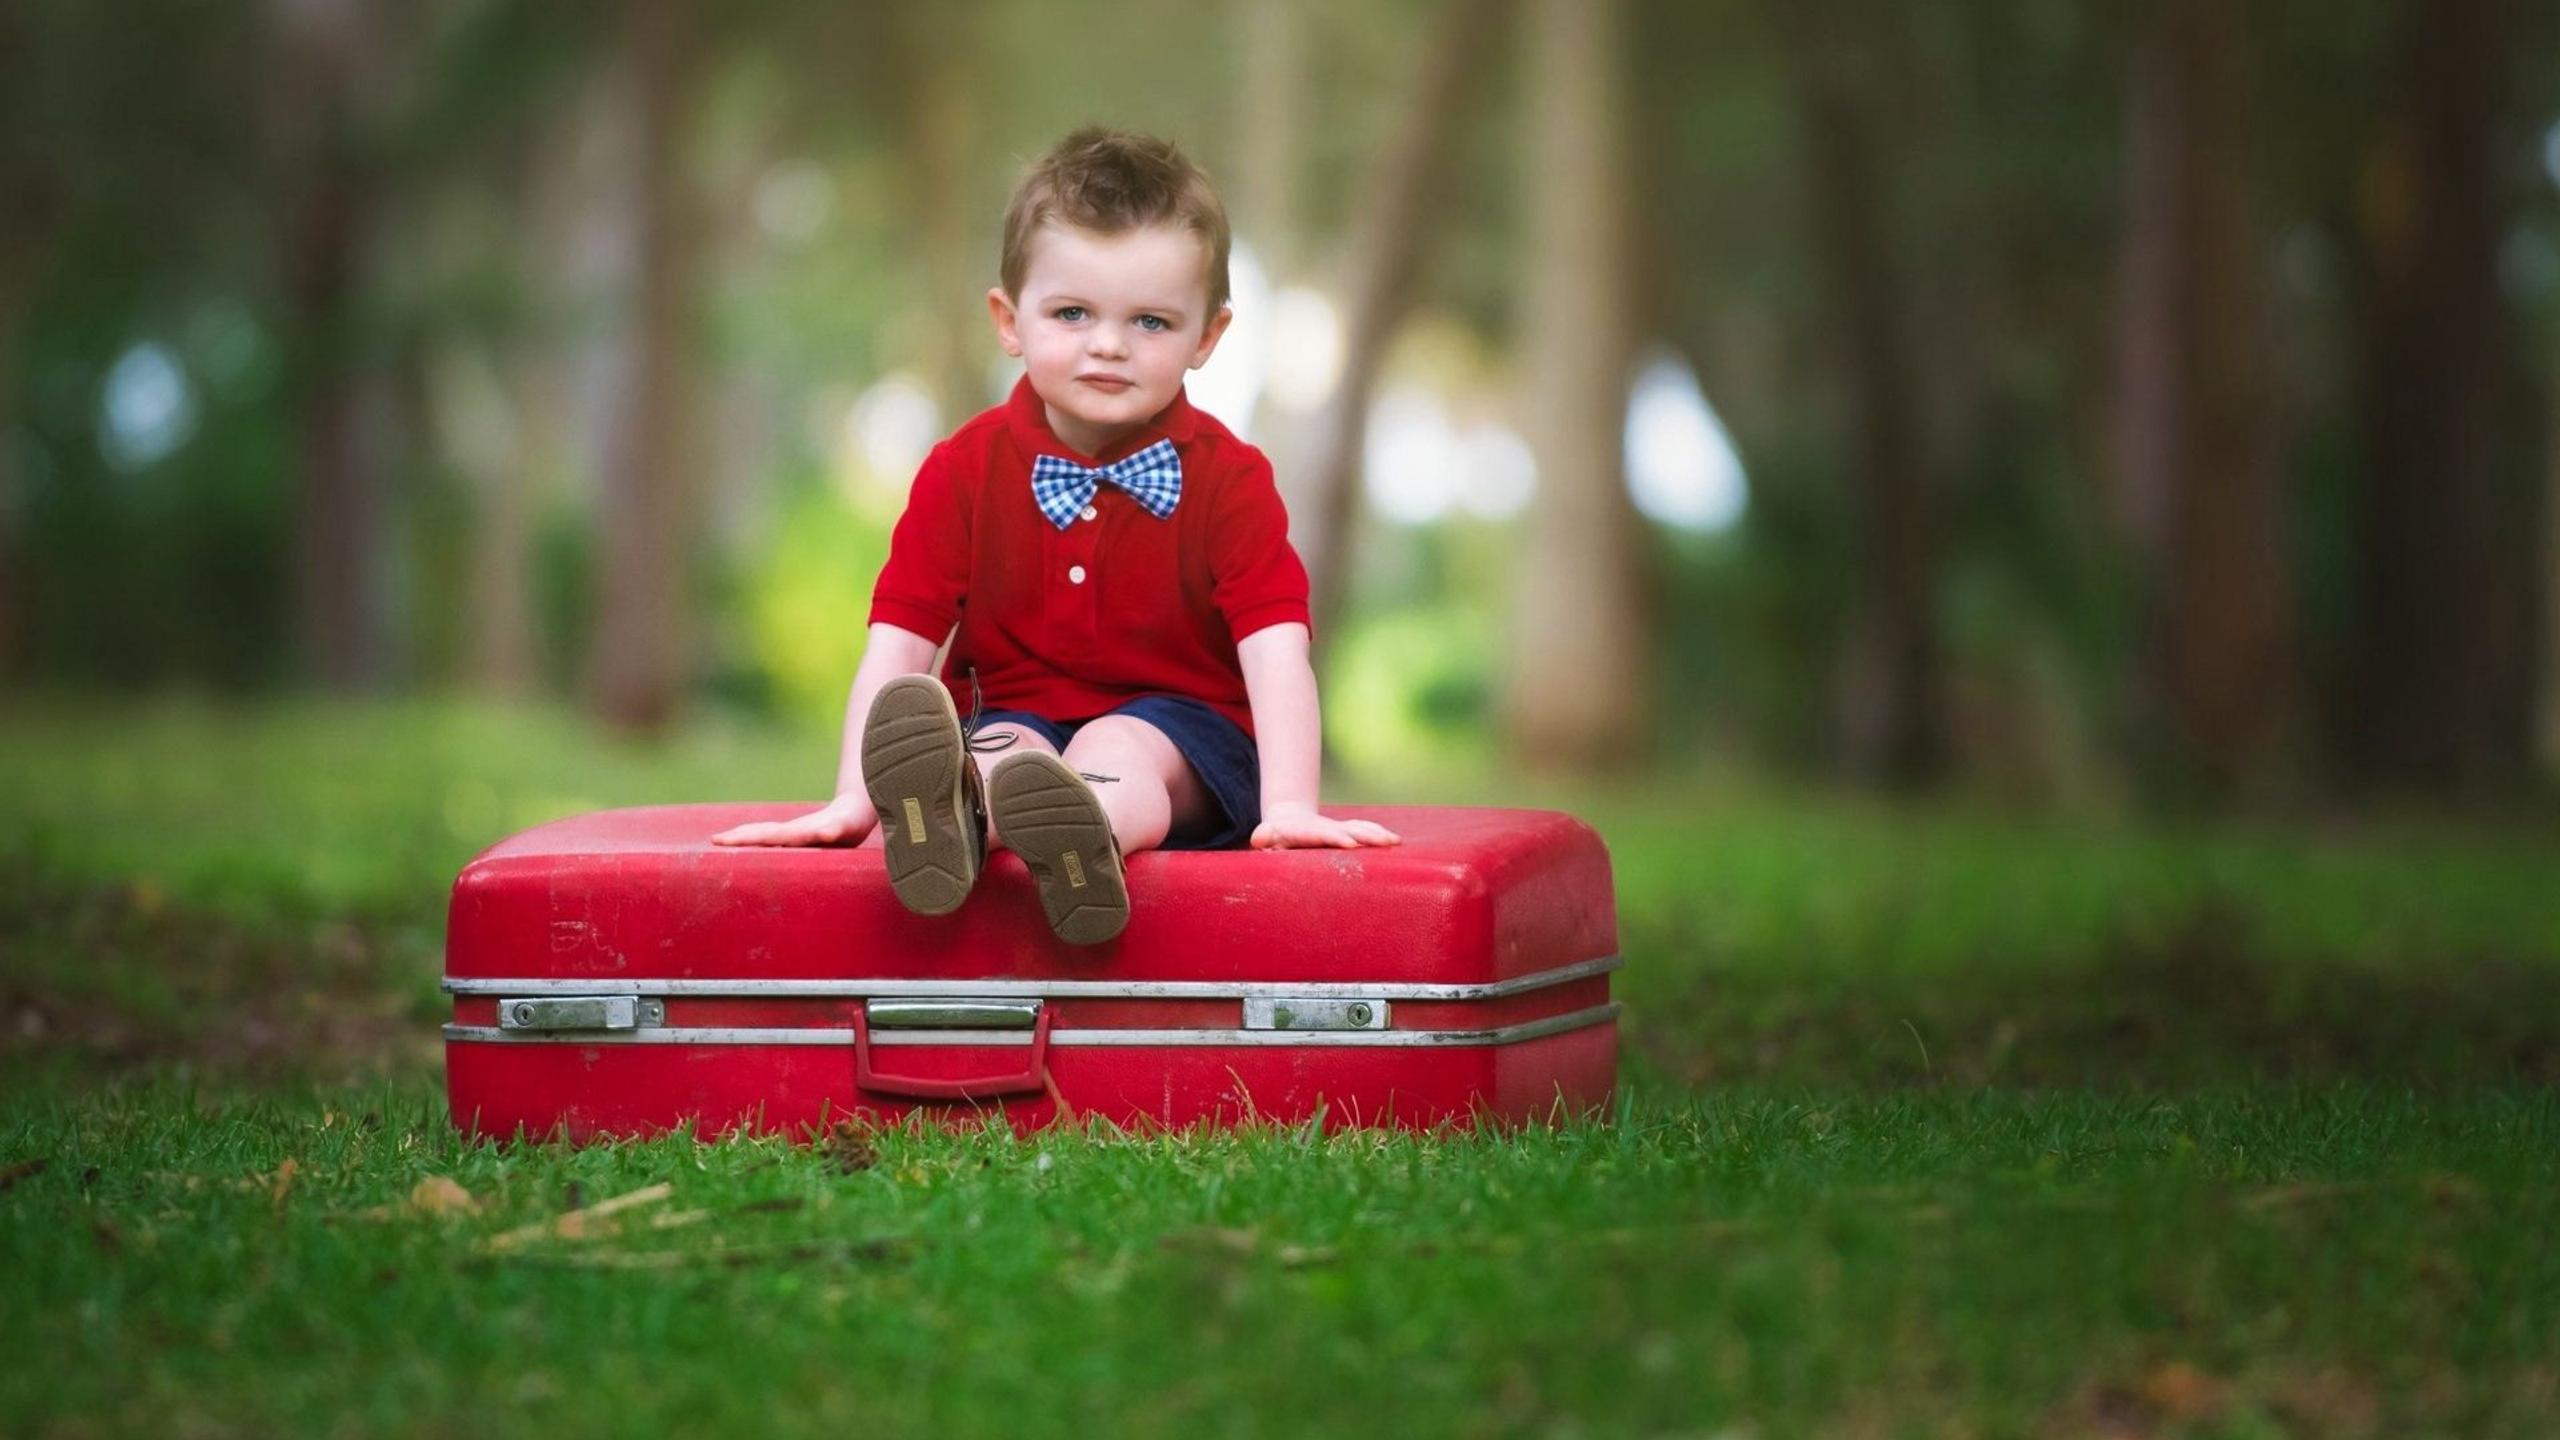 Cute baby boy with bow on a red suitcase